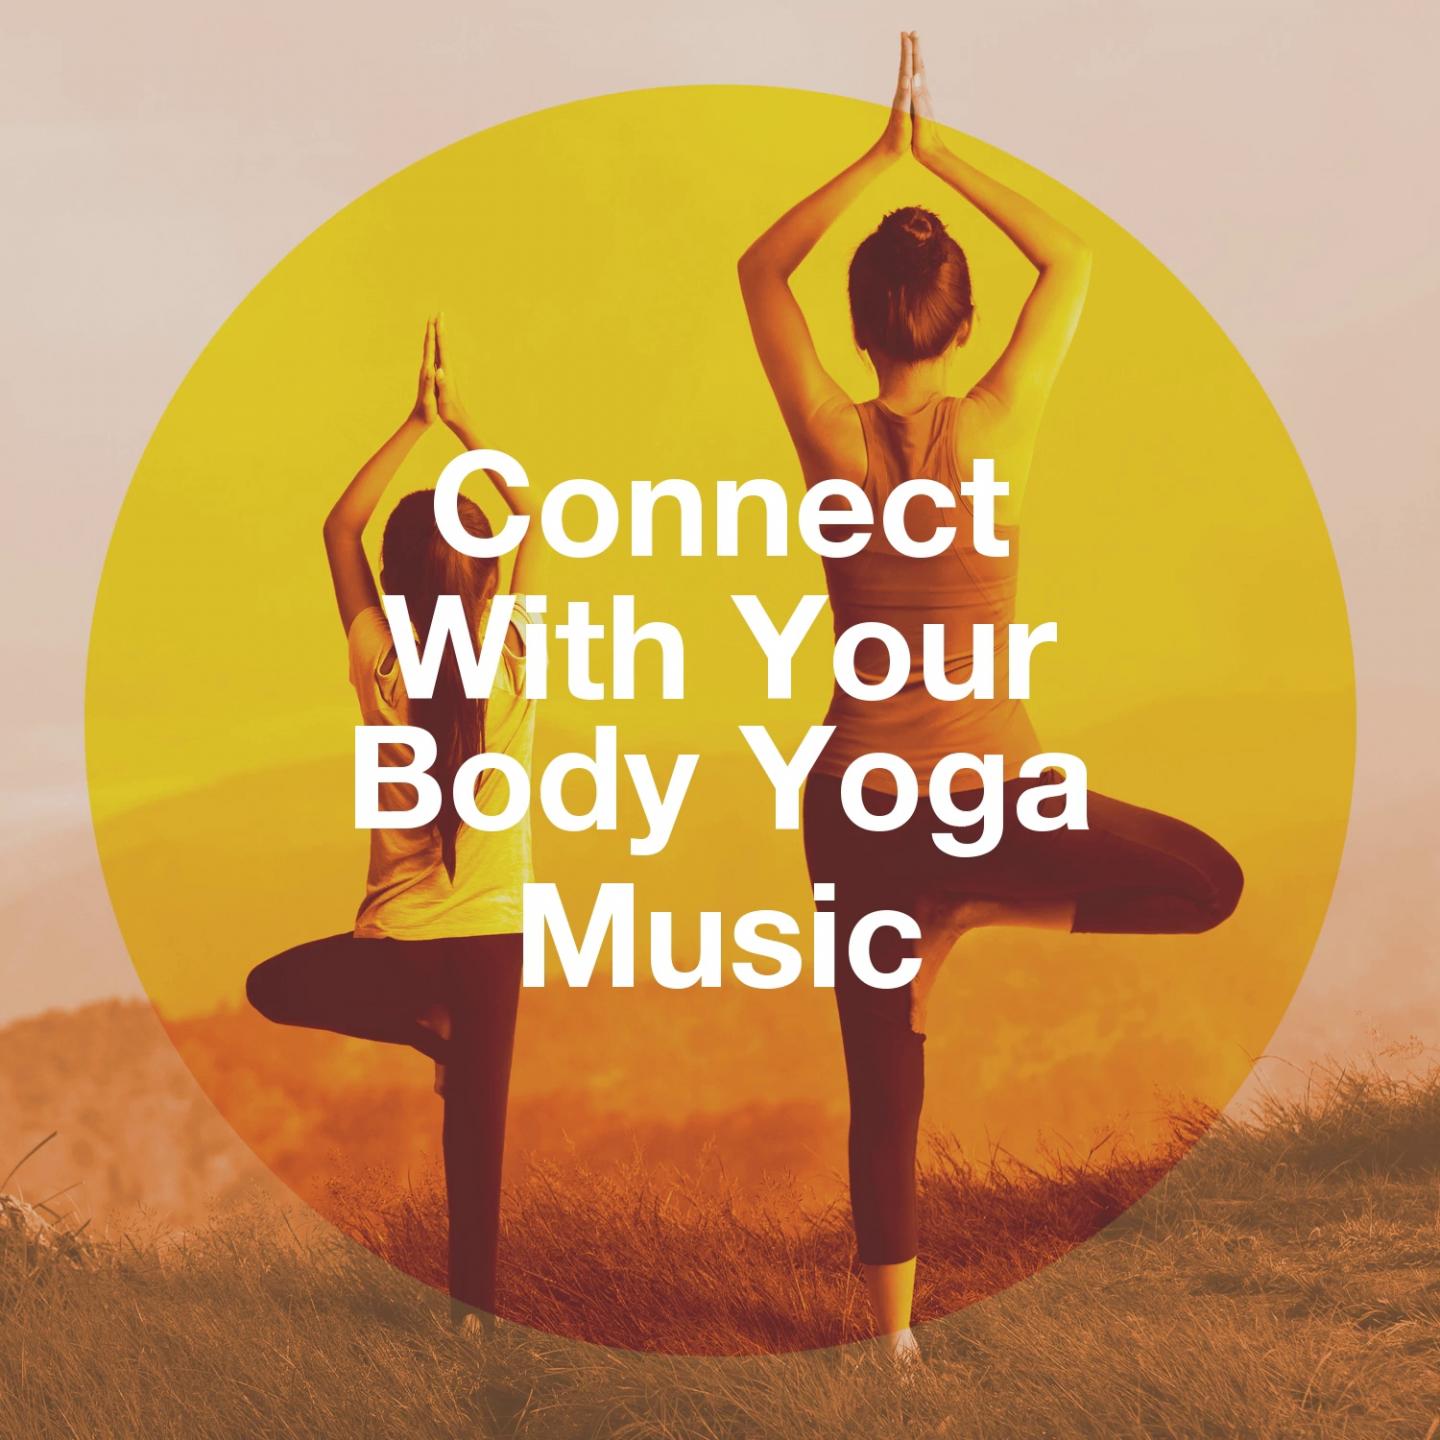 Connect with Your Body Yoga Music